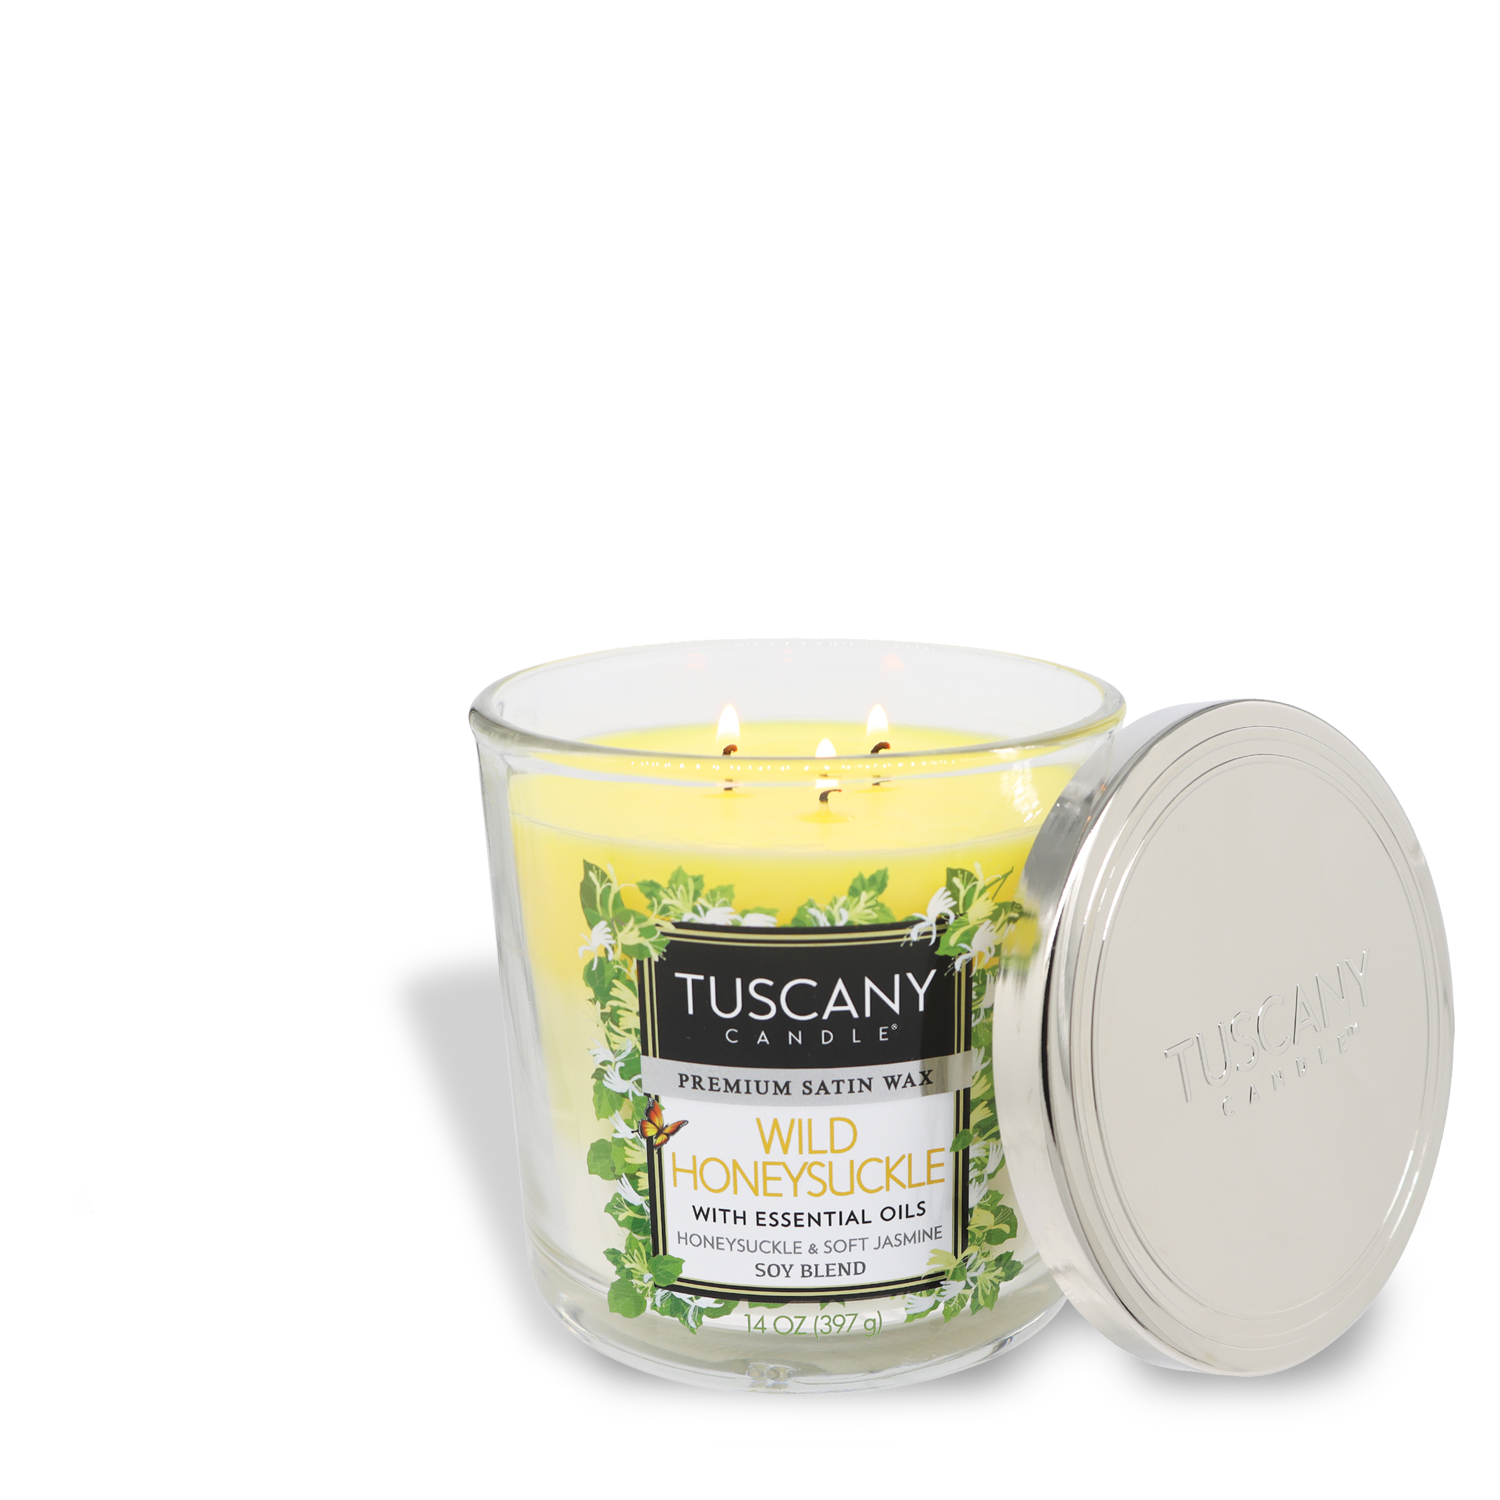 Wild Honeysuckle long-lasting scented jar candle infused with floral freshness from Tuscany Candle.